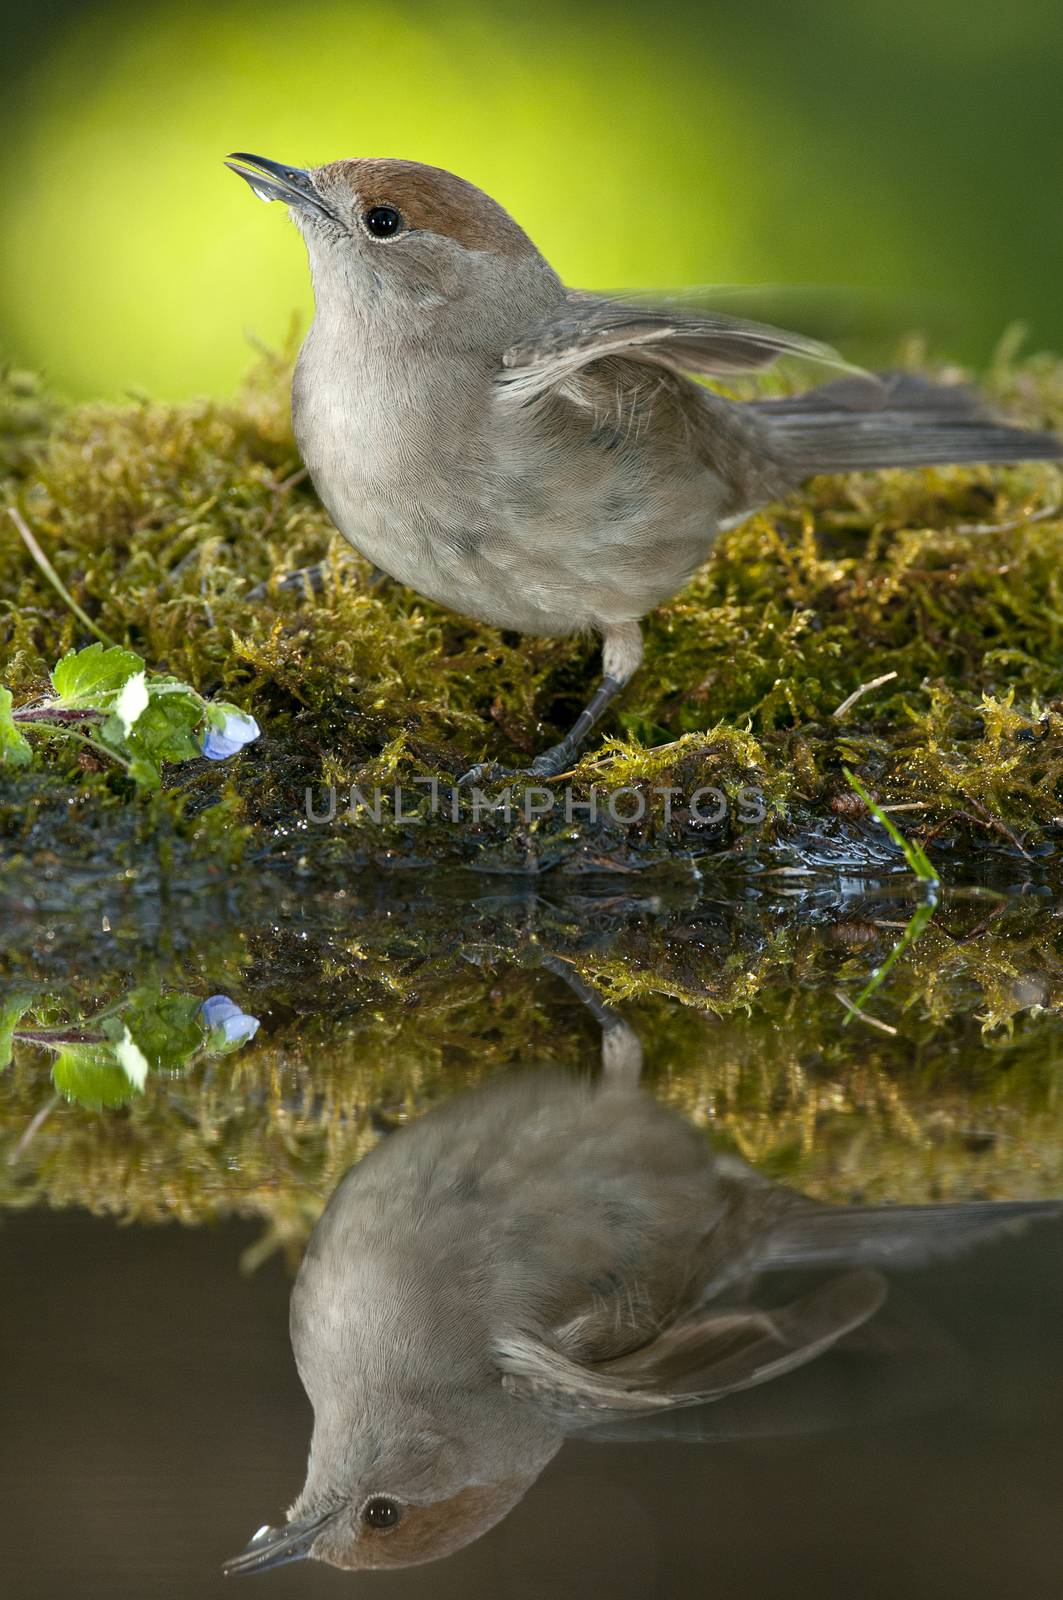 Blackcap (Sylvia atricapilla), in a drinking fountain, drinking  by jalonsohu@gmail.com